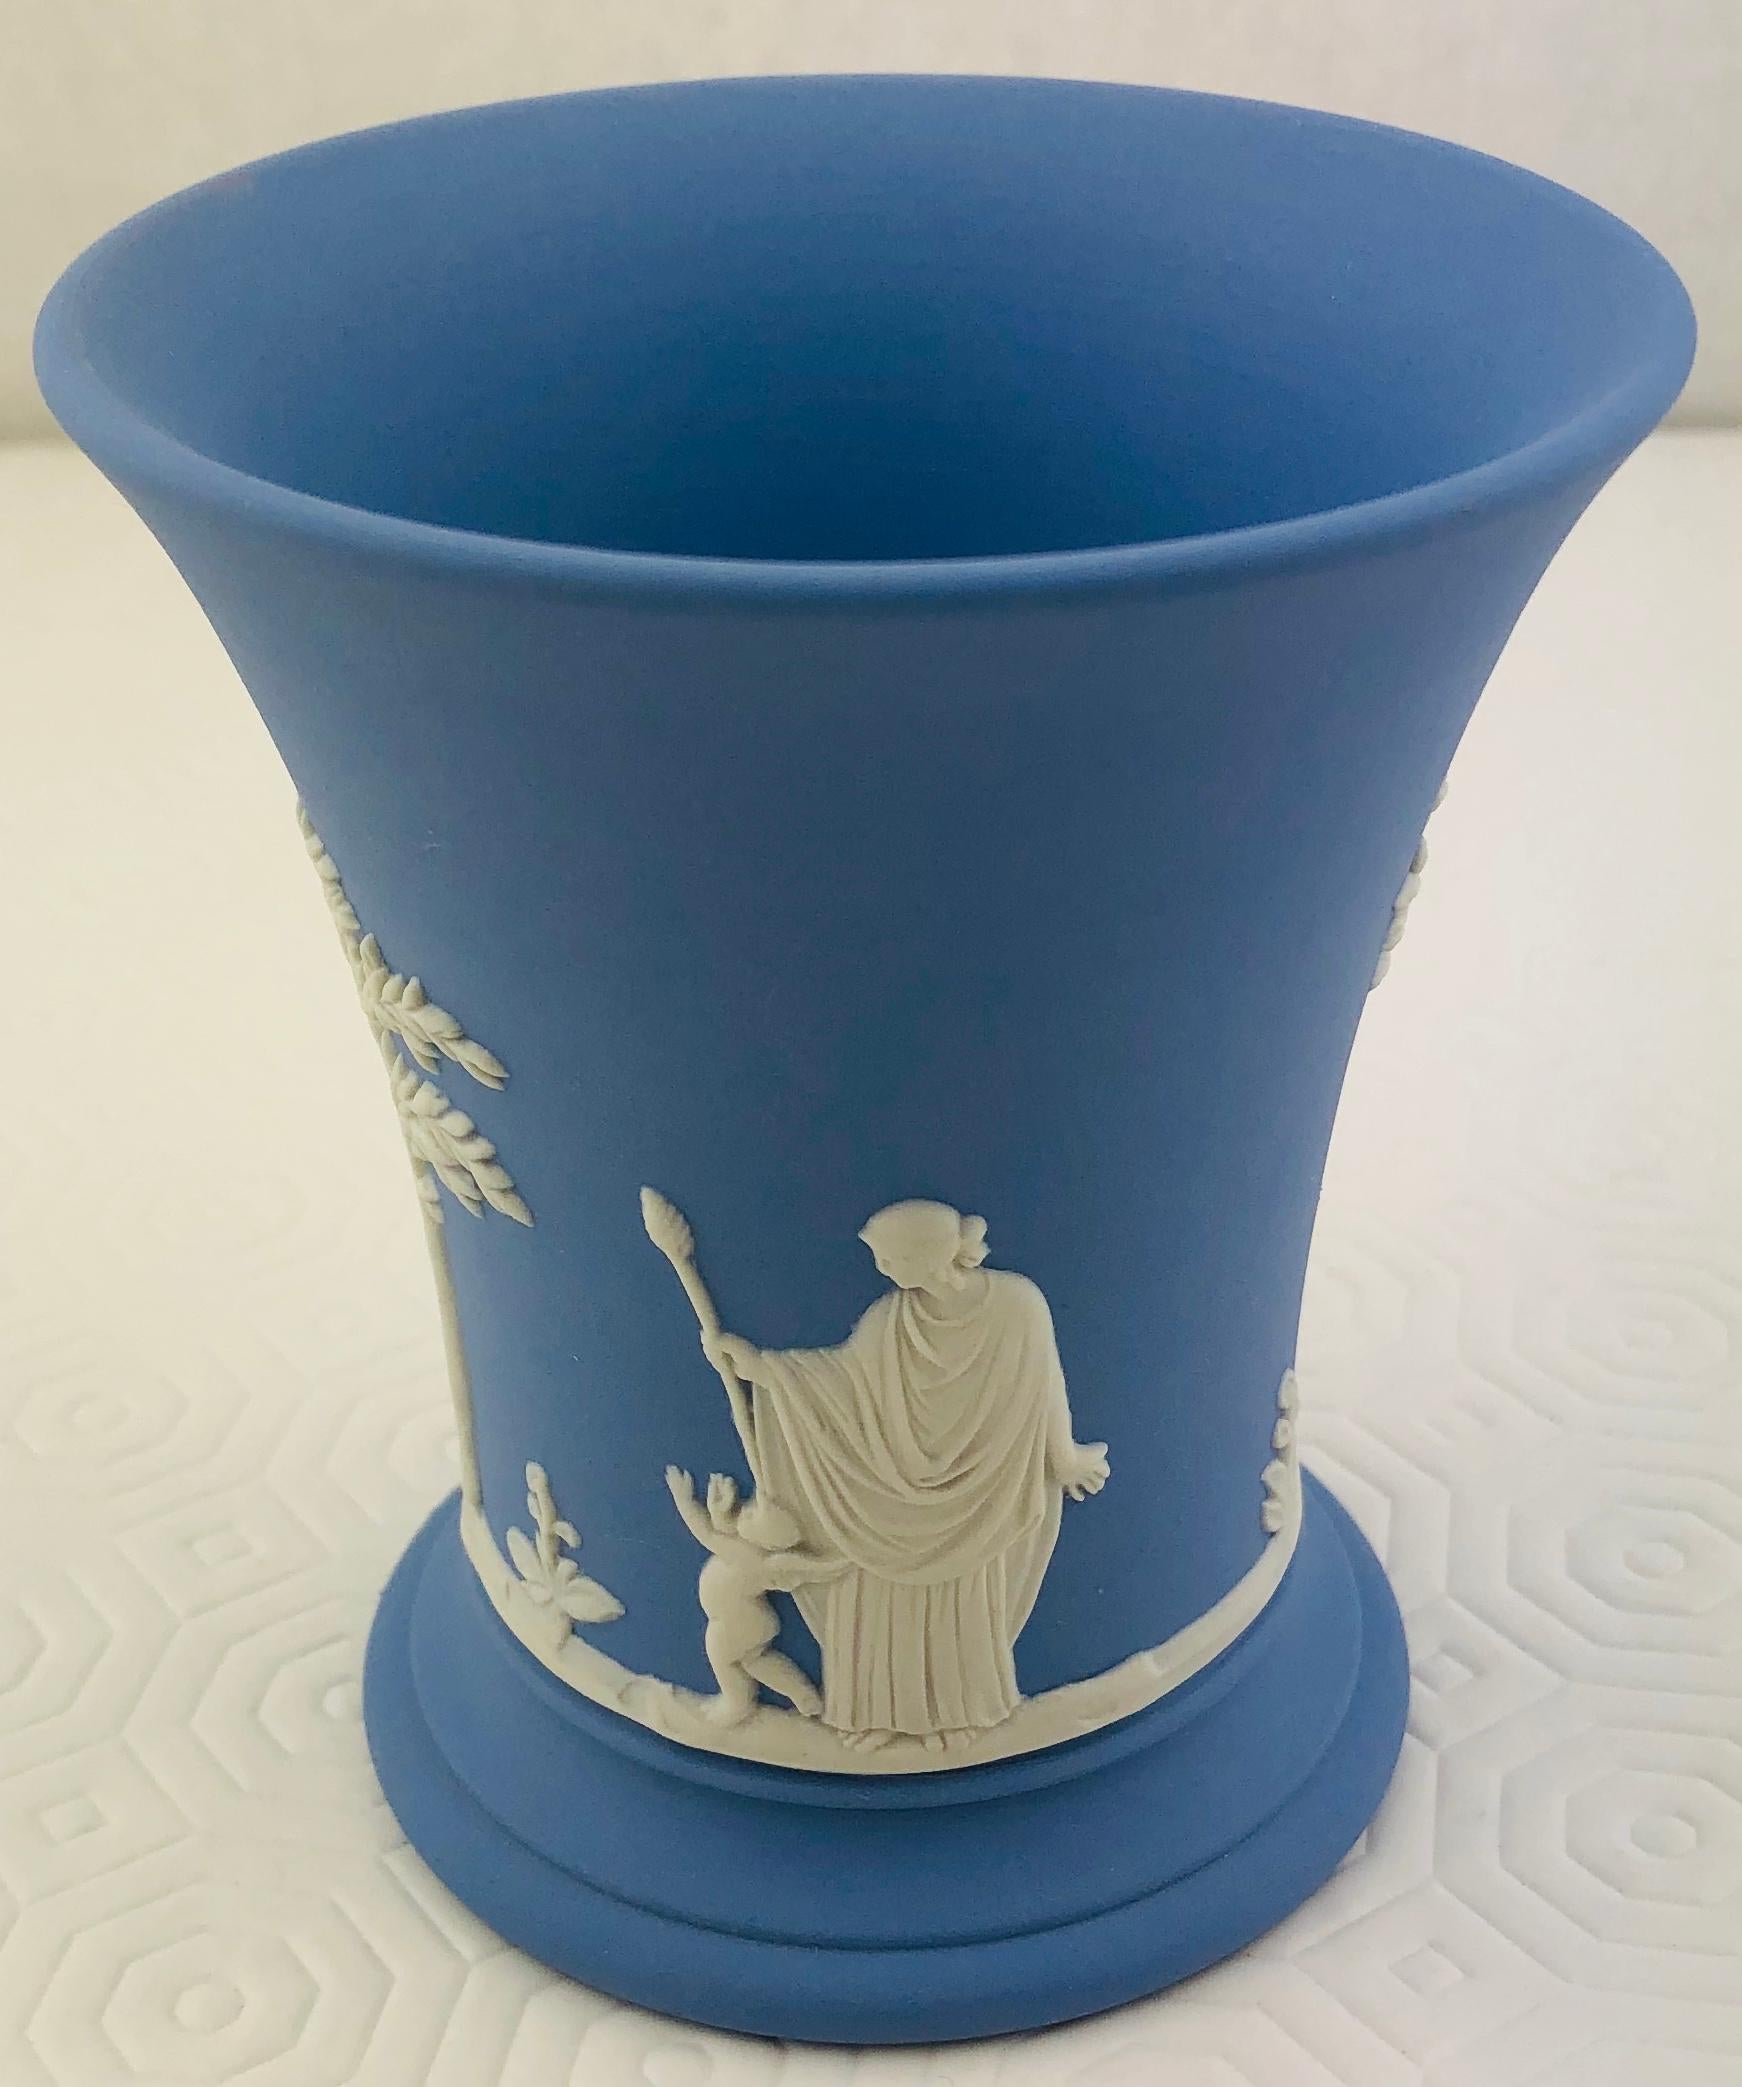 Beautiful English Wedgwood Jasperware cup or pencil holder in “Wedgwood Blue” features a repeating motif of white, high relief acanthus leaves alternating with floral sprigs and a floral banded border.

Jasperware or Jasper ware is a type of